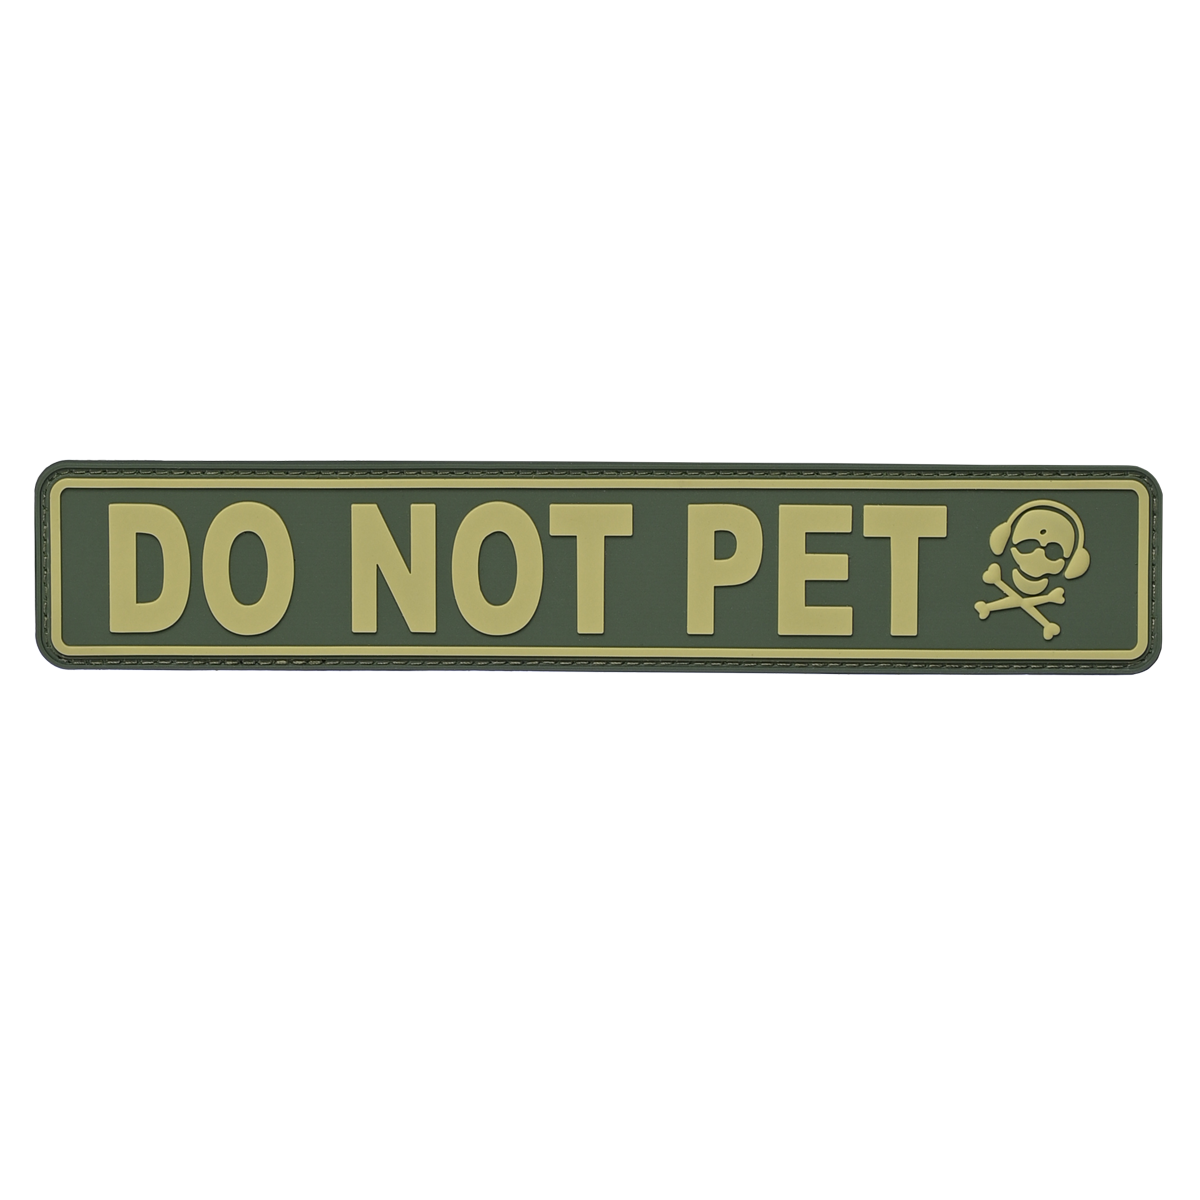 K9 DO NOT PET Patch: Edge Works